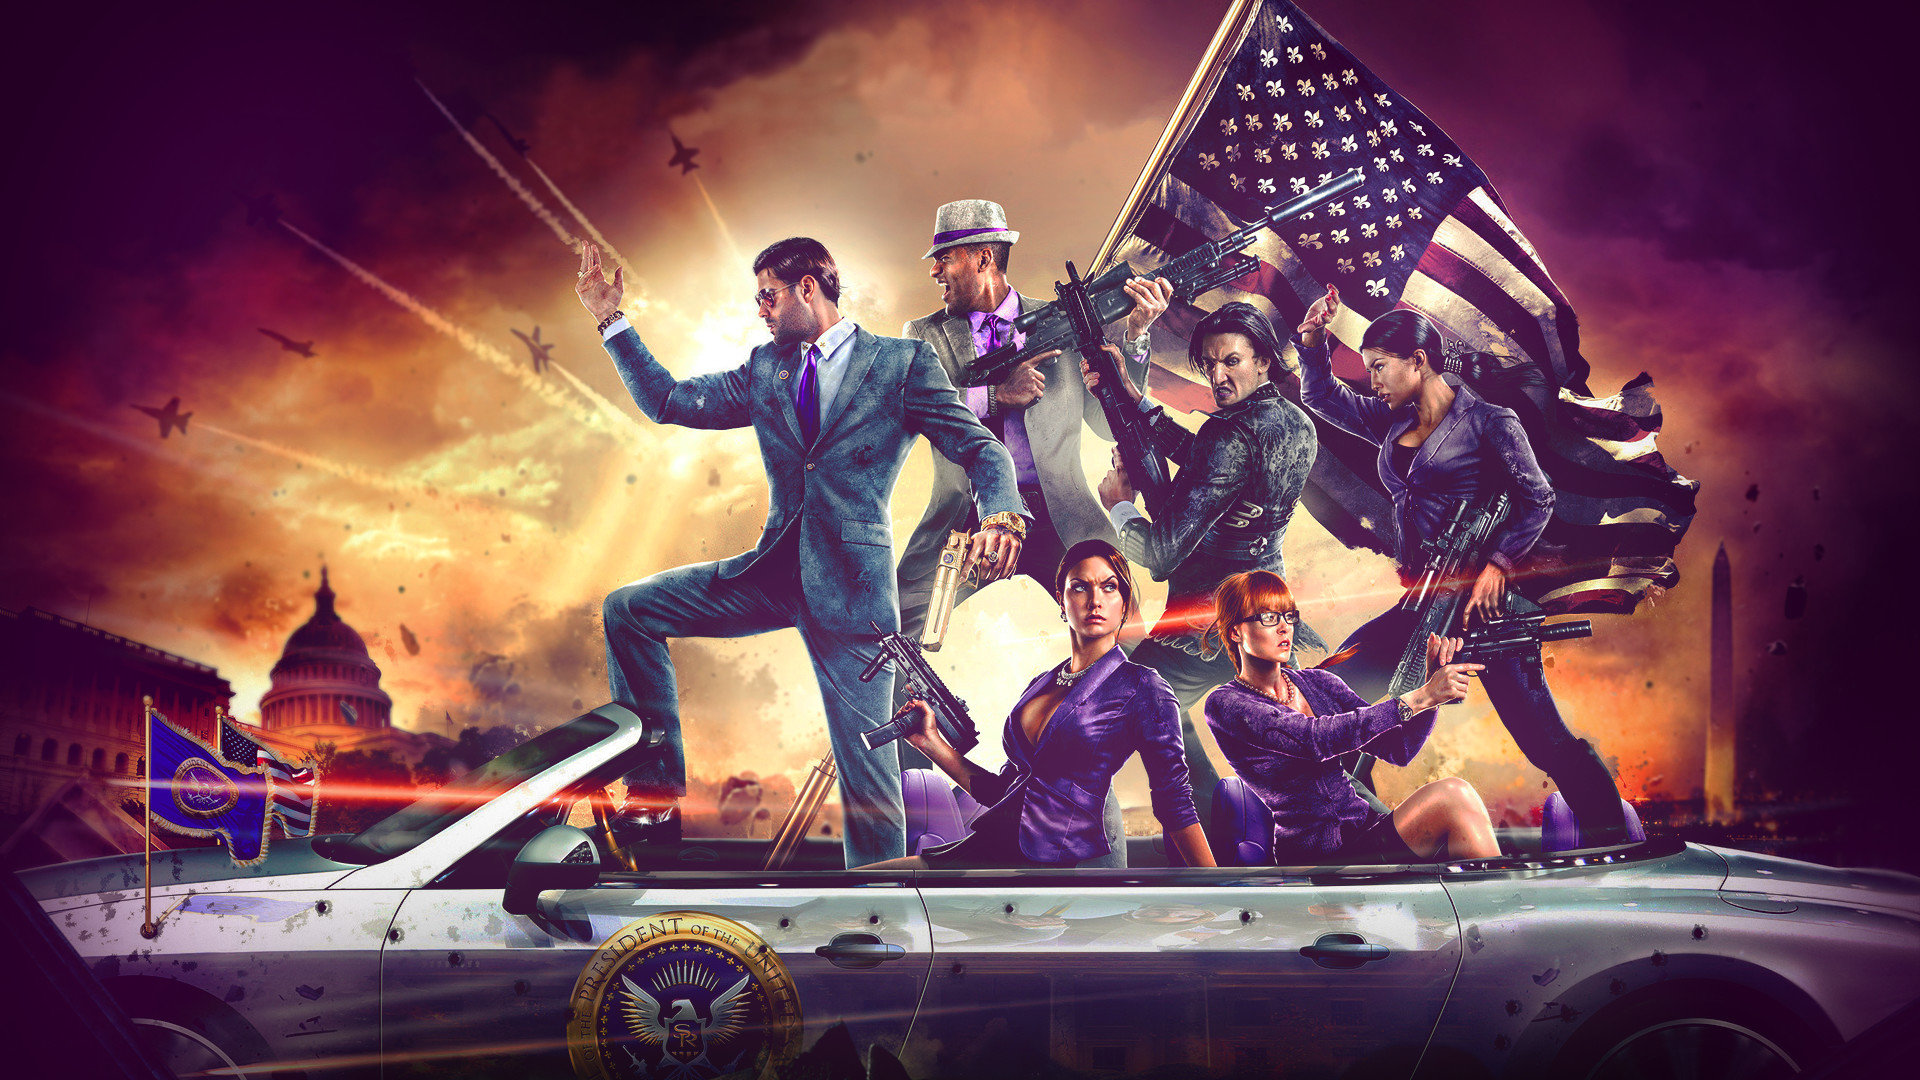 Awesome Saints Row 4 (IV) free wallpaper ID:238051 for full hd computer